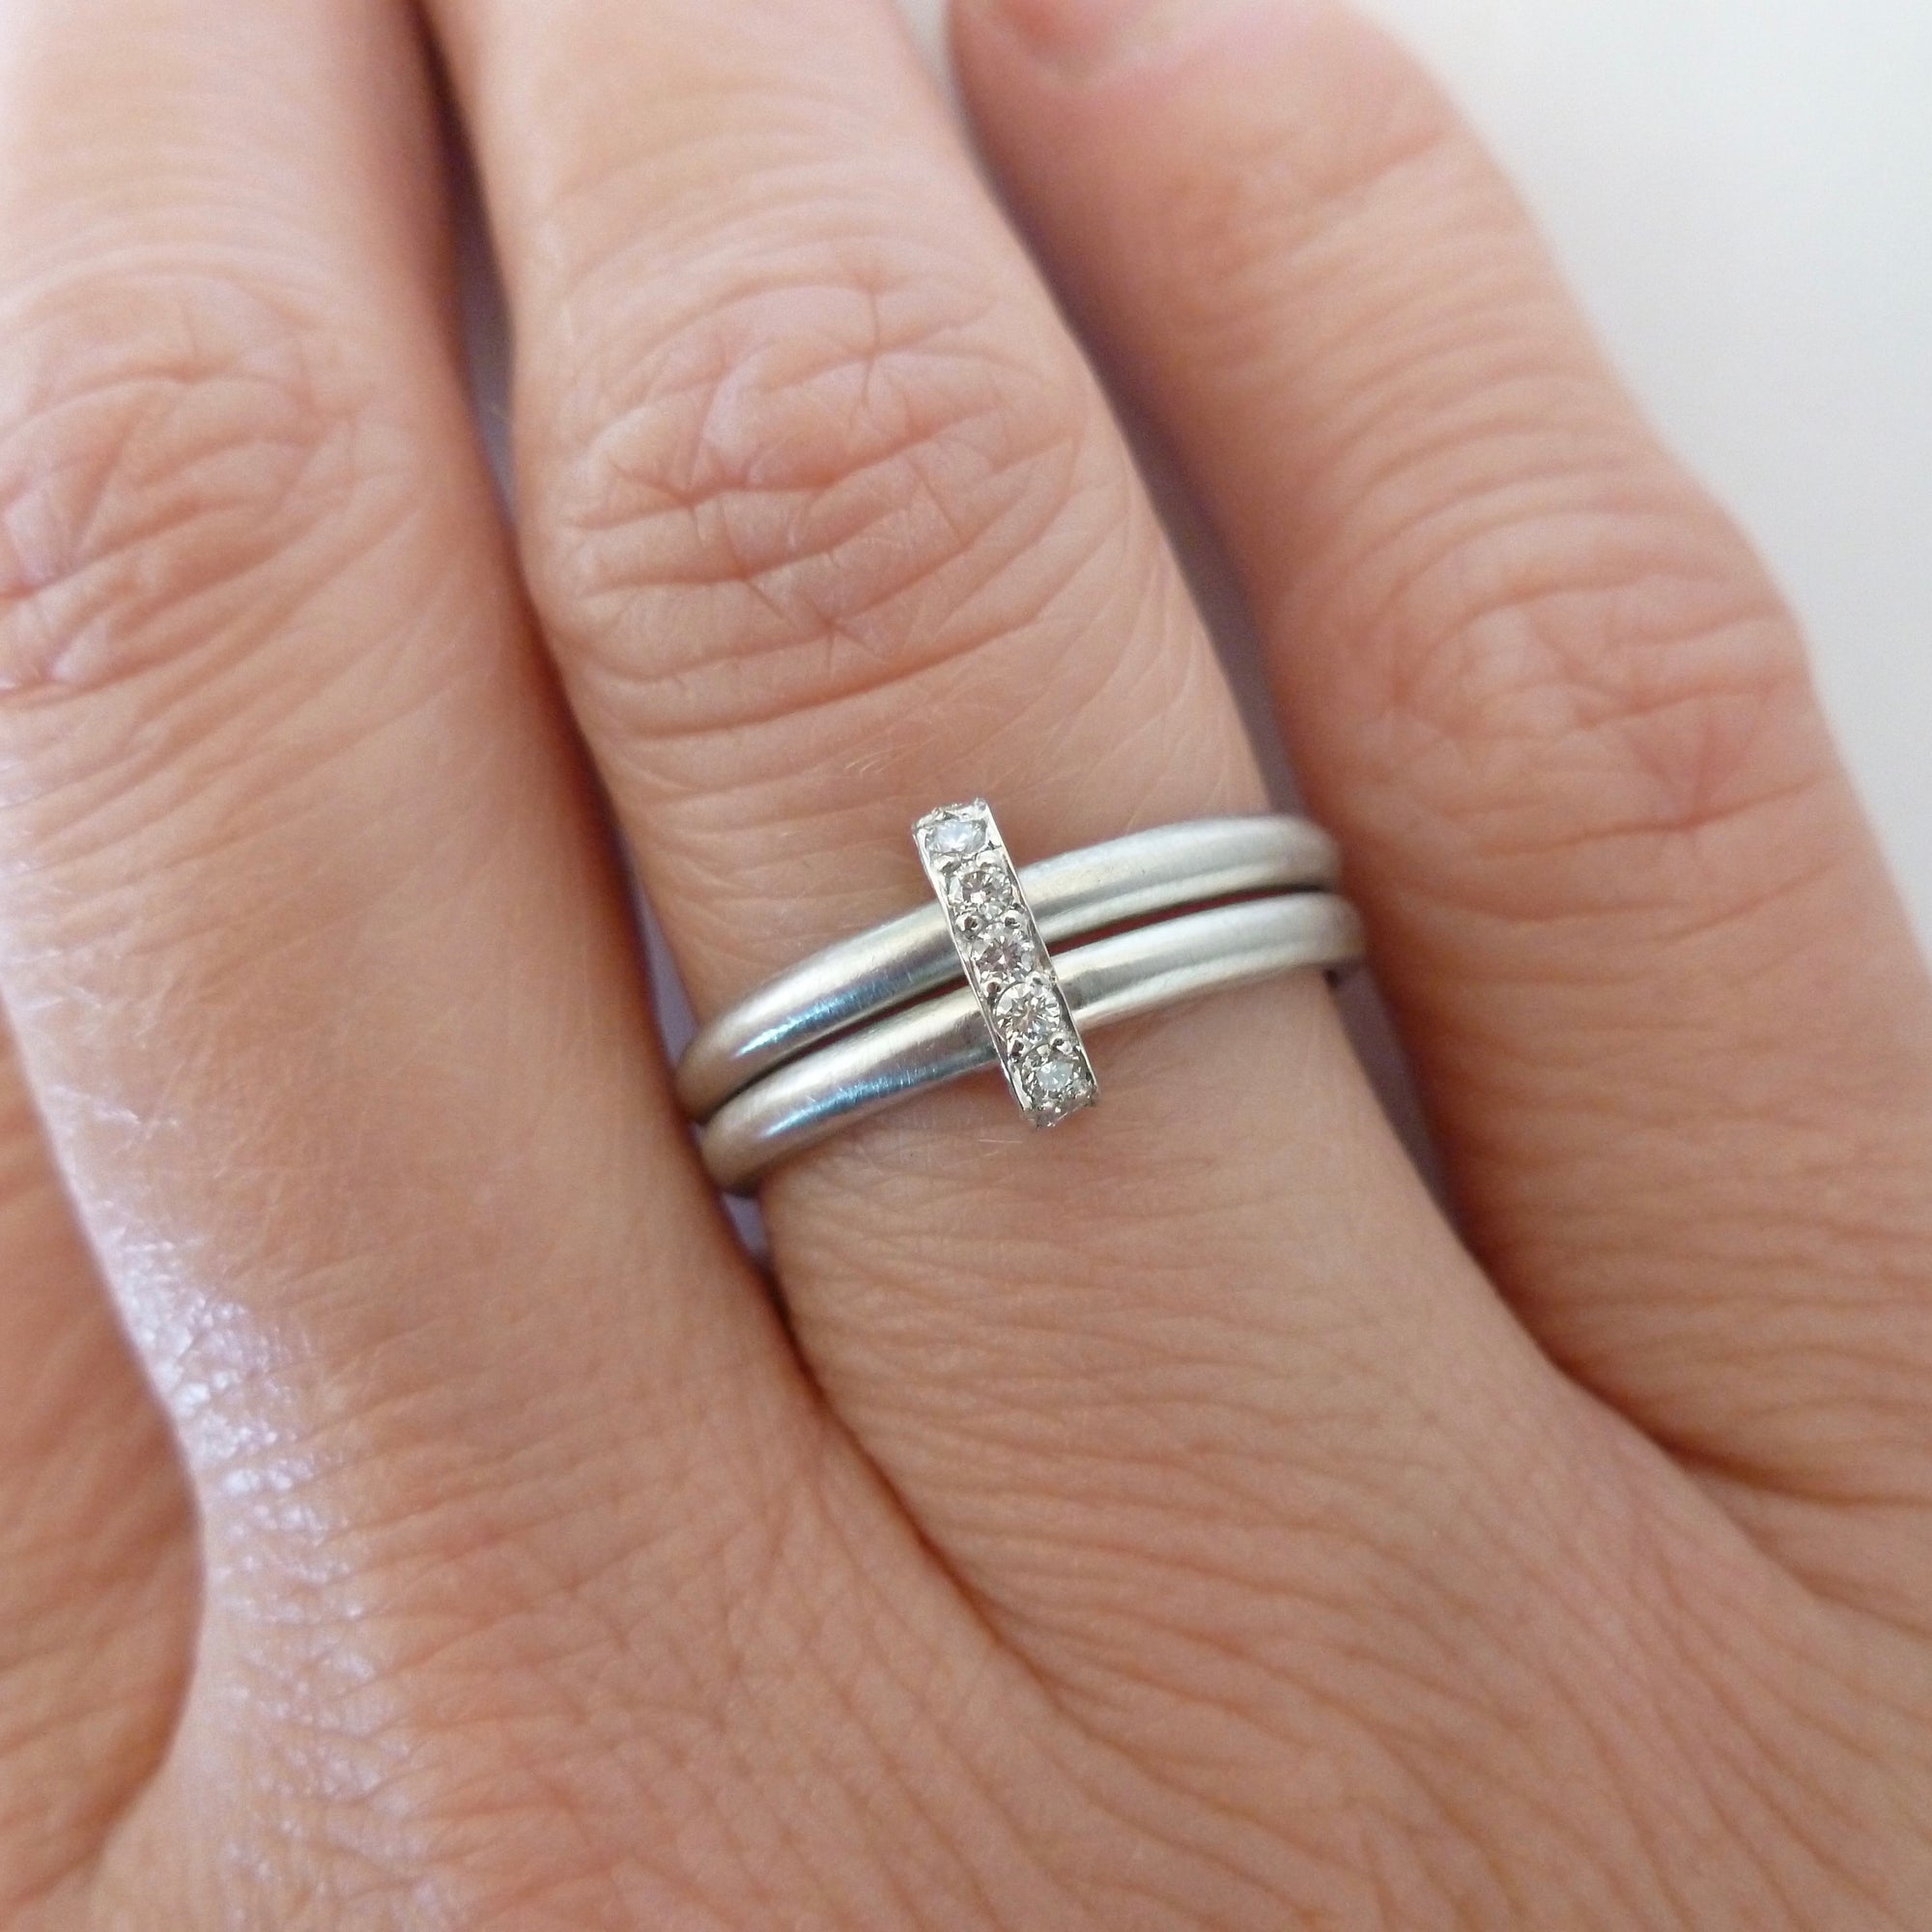 Contemporary modern platinum and diamond eternity ring or wedding ring. Multi band ring or interlocking ring, sometimes called double band ring too.